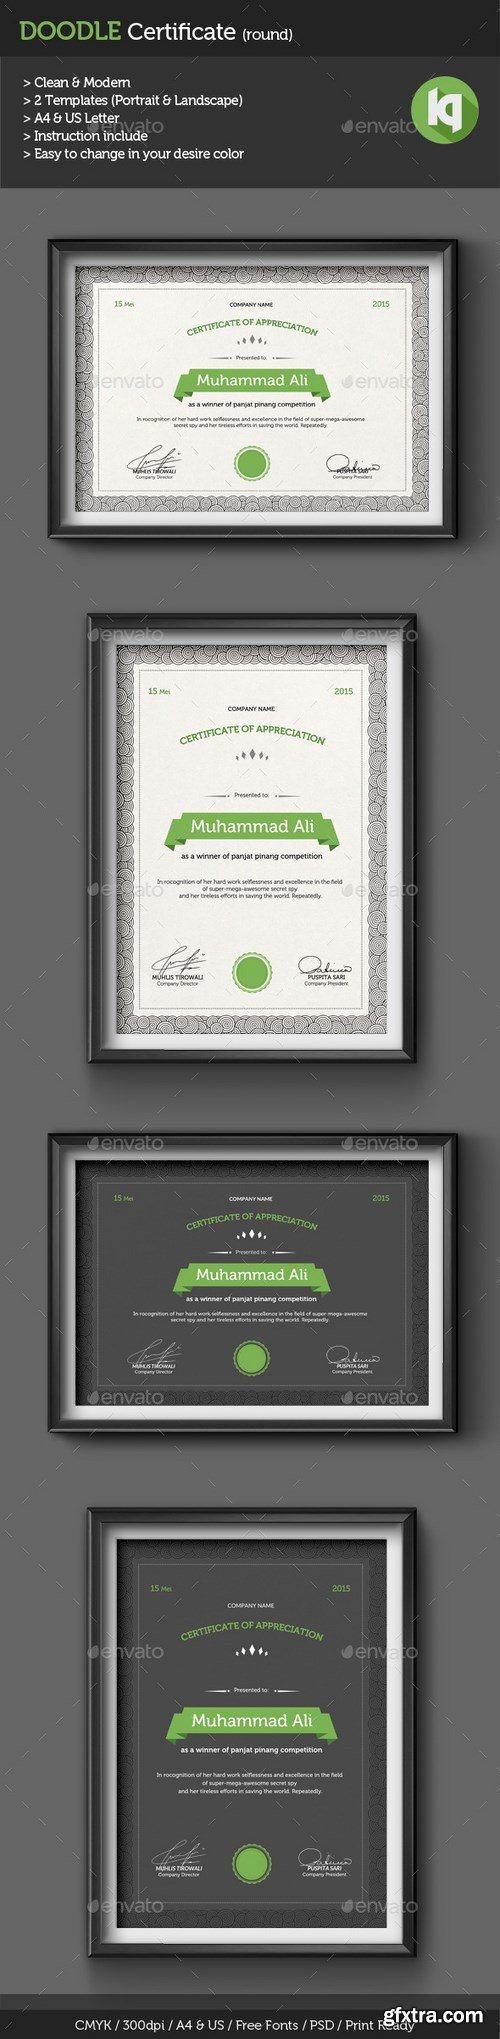 GraphicRiver - Doodle Certificate Template (round)